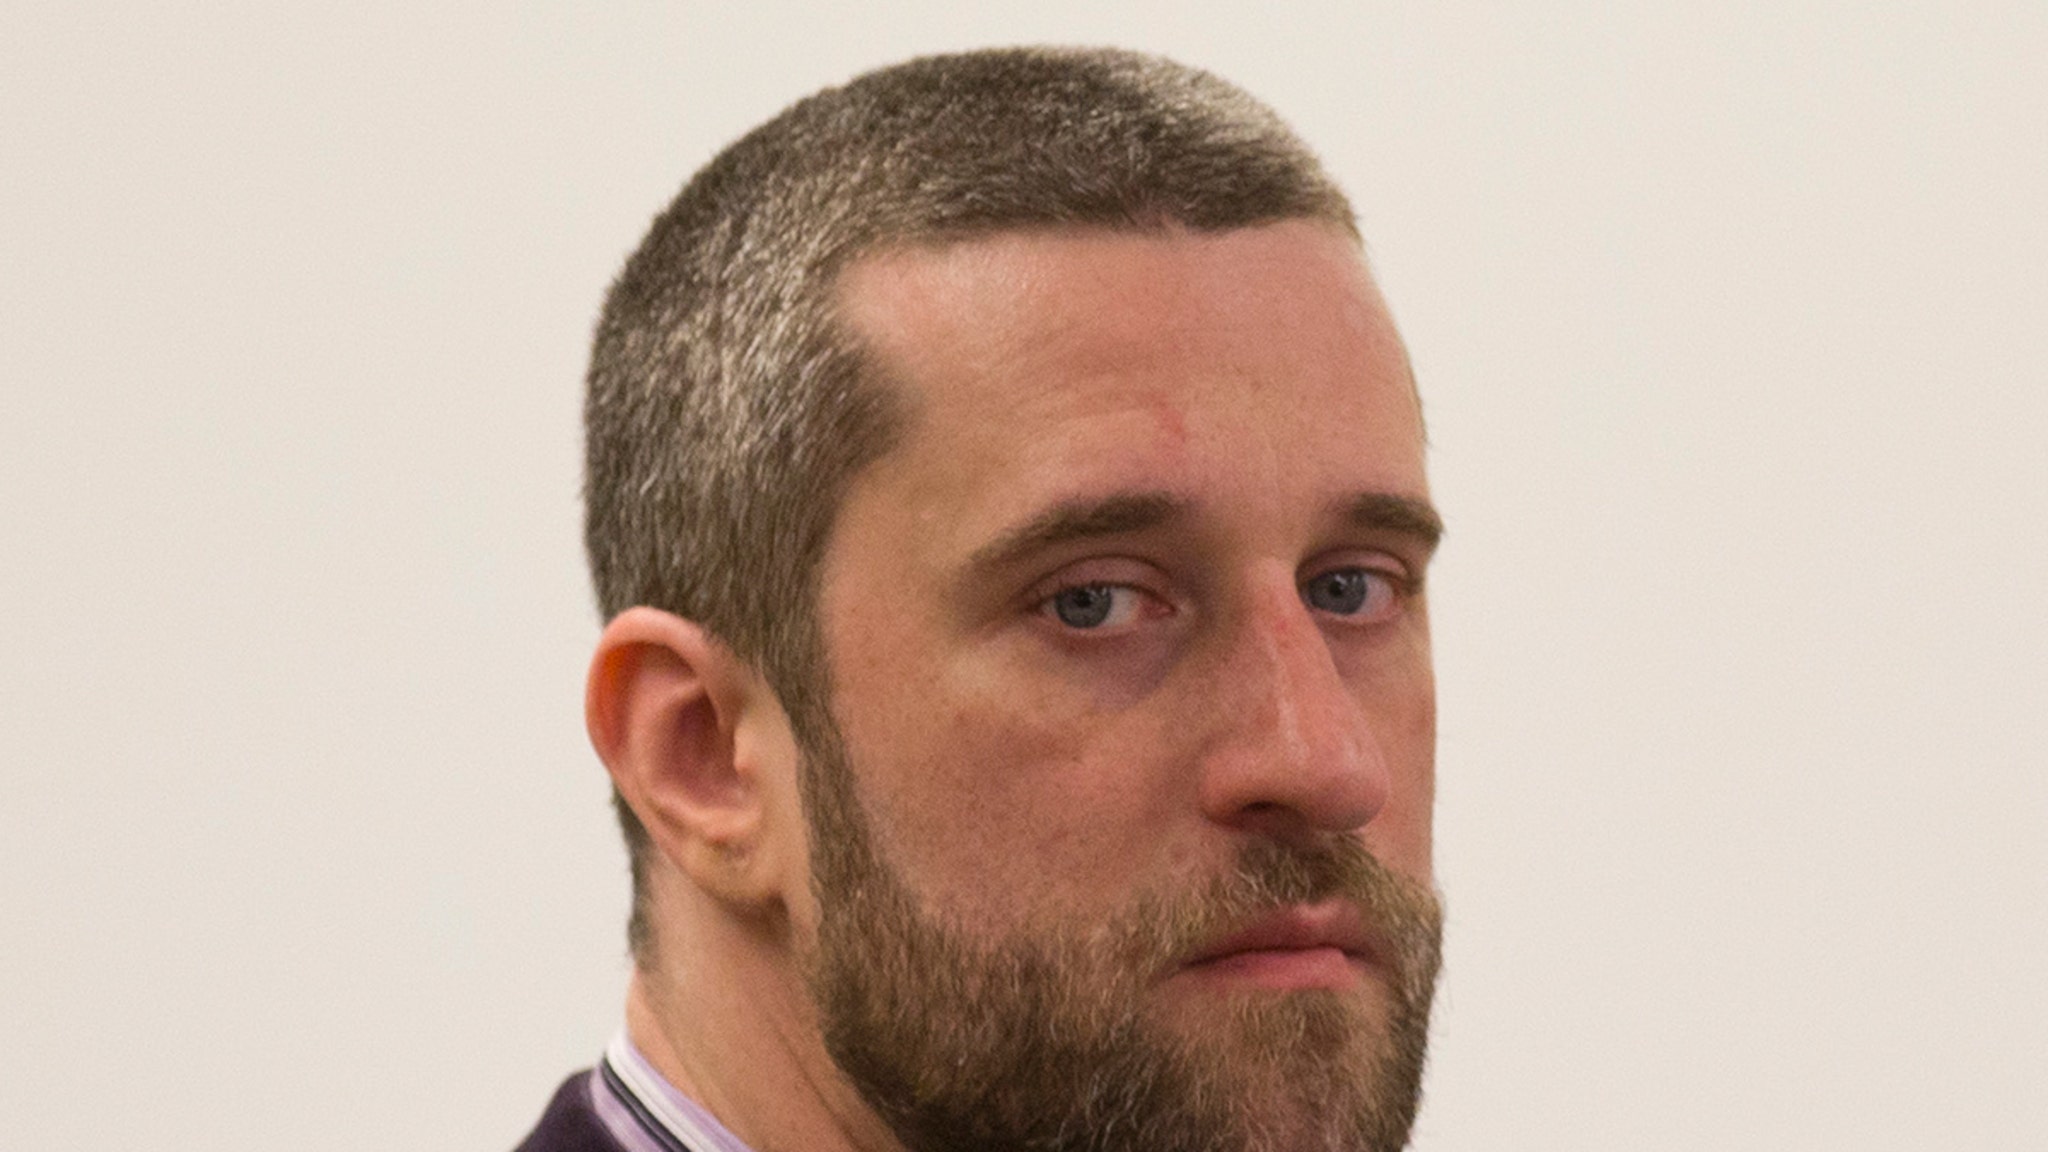 Dustin Diamond has stage 4 small cell carcinoma, completes first round of chemo